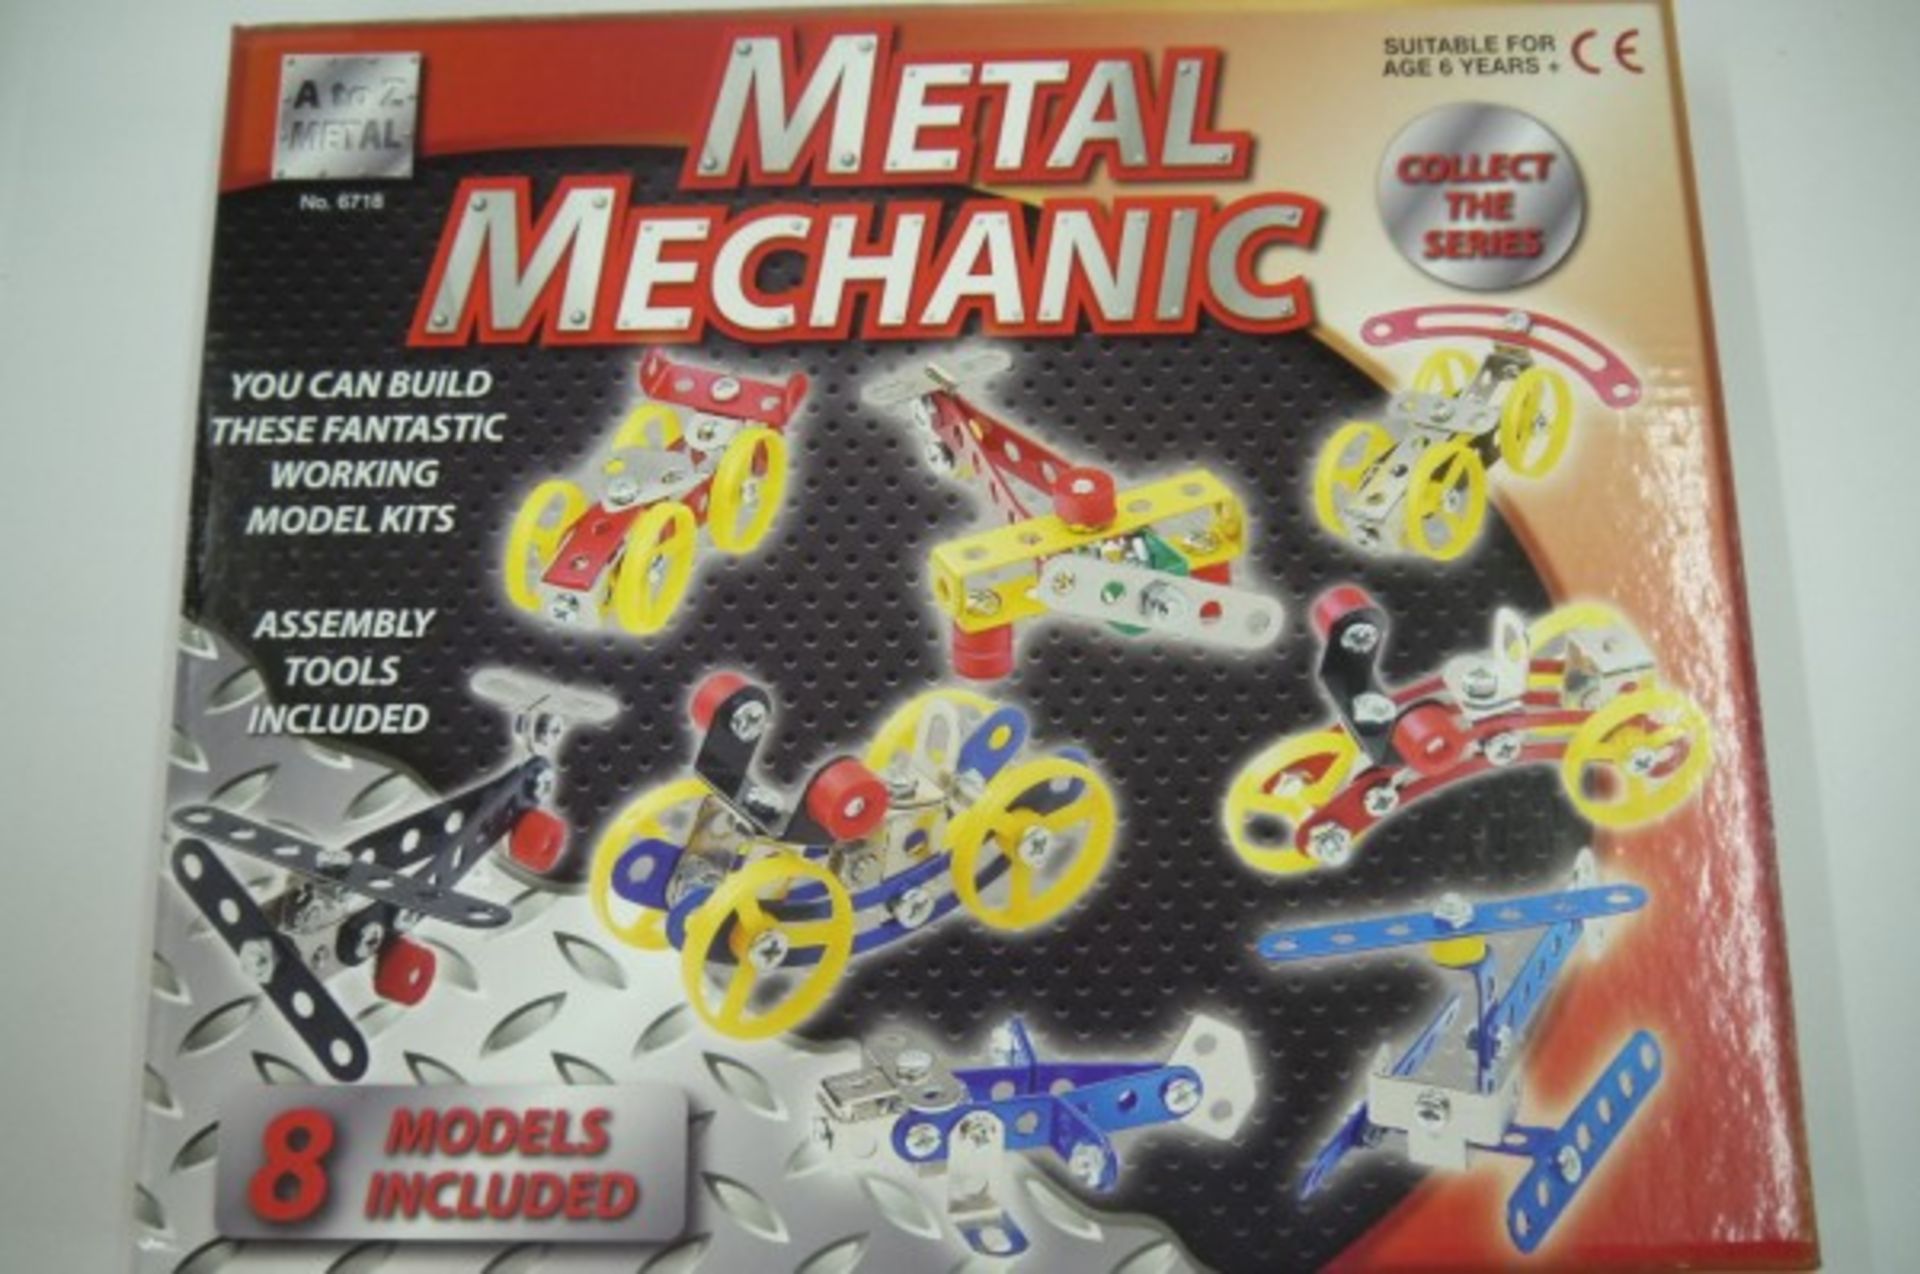 V Brand New Meccano Type Construction Kit Makes 8 Models (Includes Tools) X 2 Bid price to be